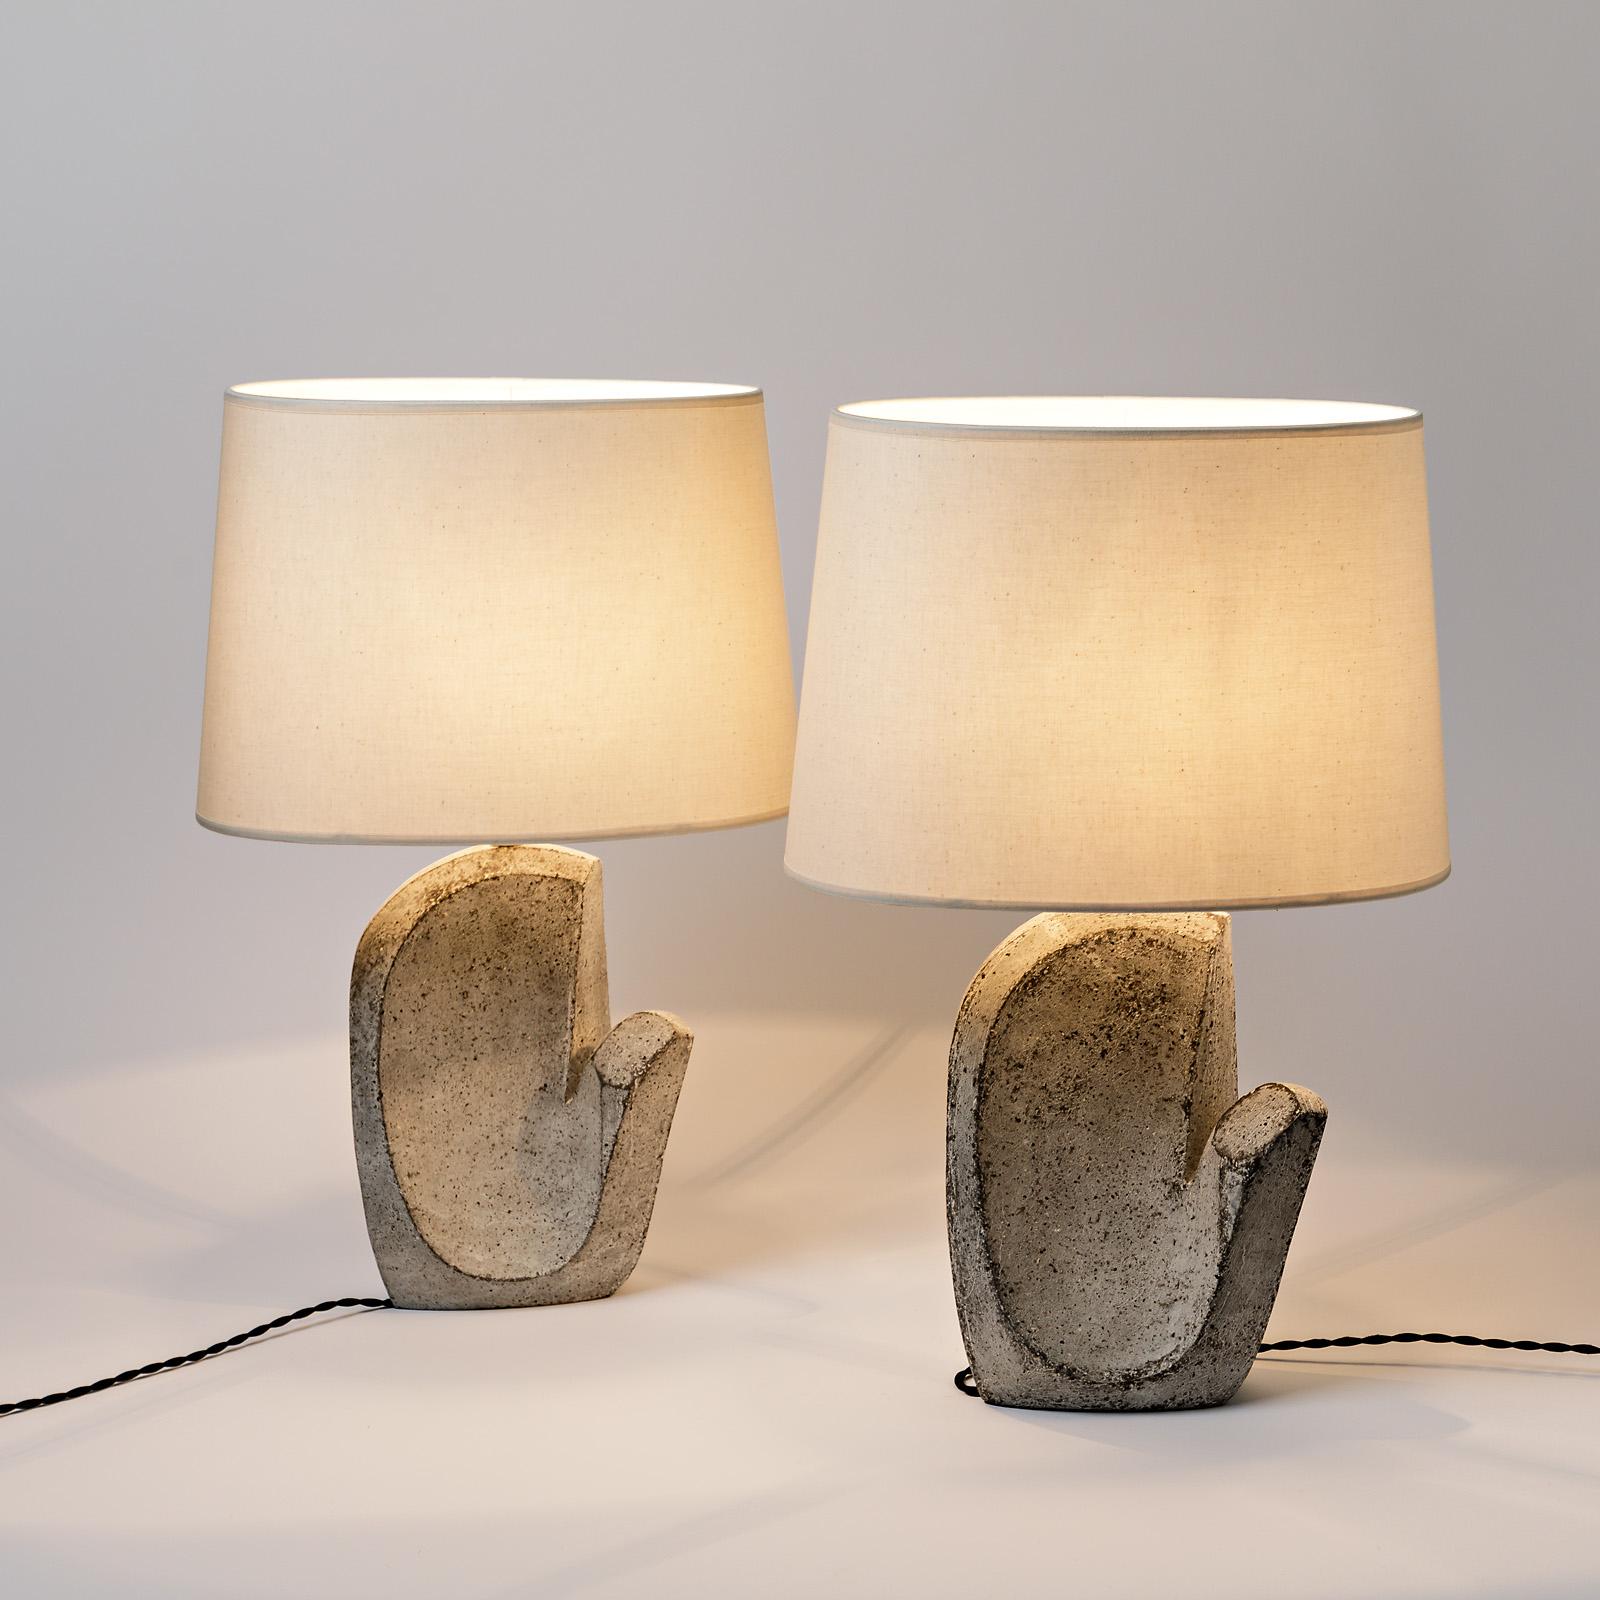 A pair of ceramic table lamps by Maarten Stuer.
Signed under the base.
Sold with the lampshade and a new European electrical system.
2021.
Dimensions : 
Dimensions with ceramic, electrical system, lampshade : 53 x 30 x 20 cm
Dimensions without